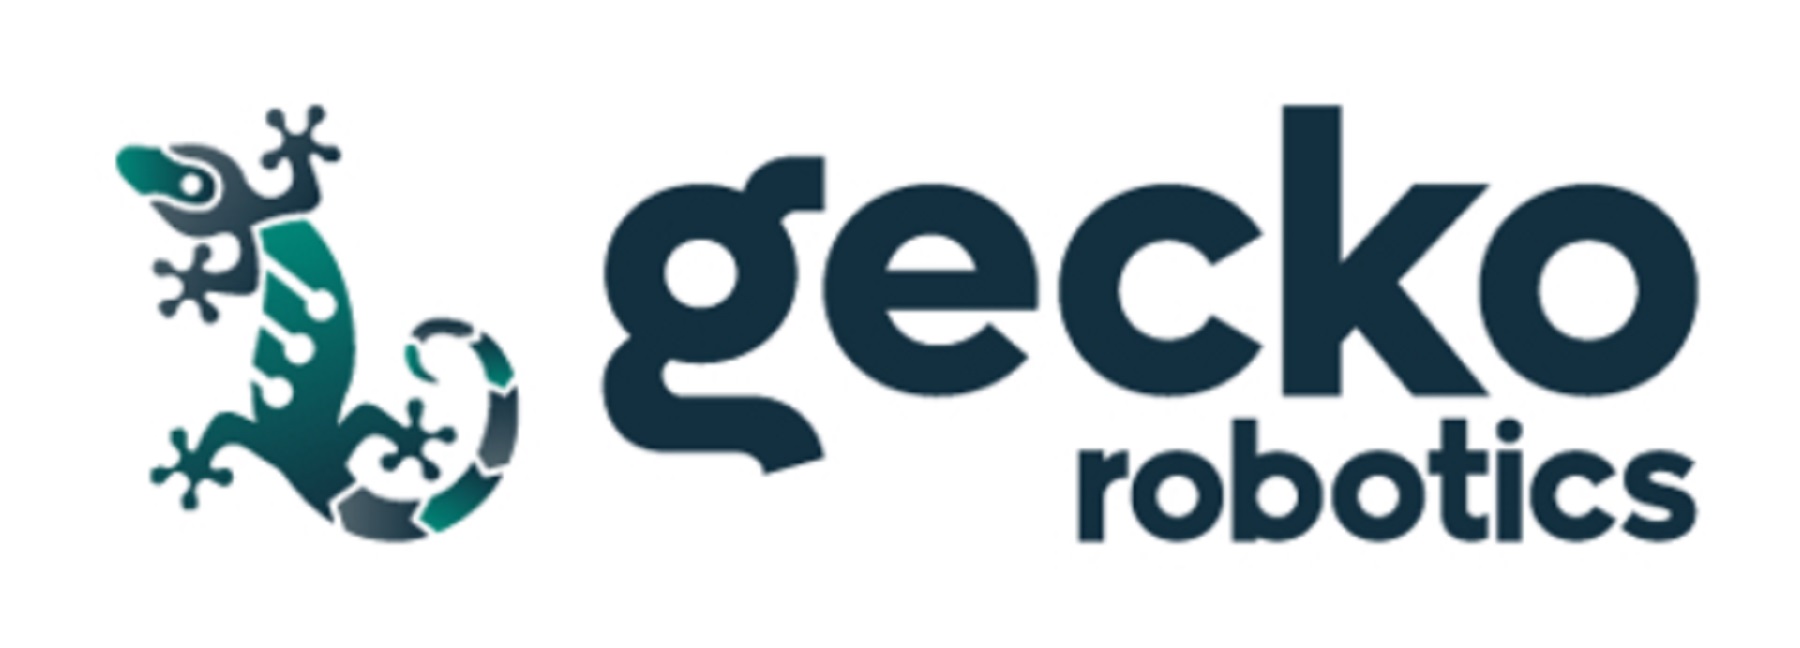 Gecko Robotics Expands Work with U.S. Navy to Include First Amphibious Assault Ship and Additional Destroyer